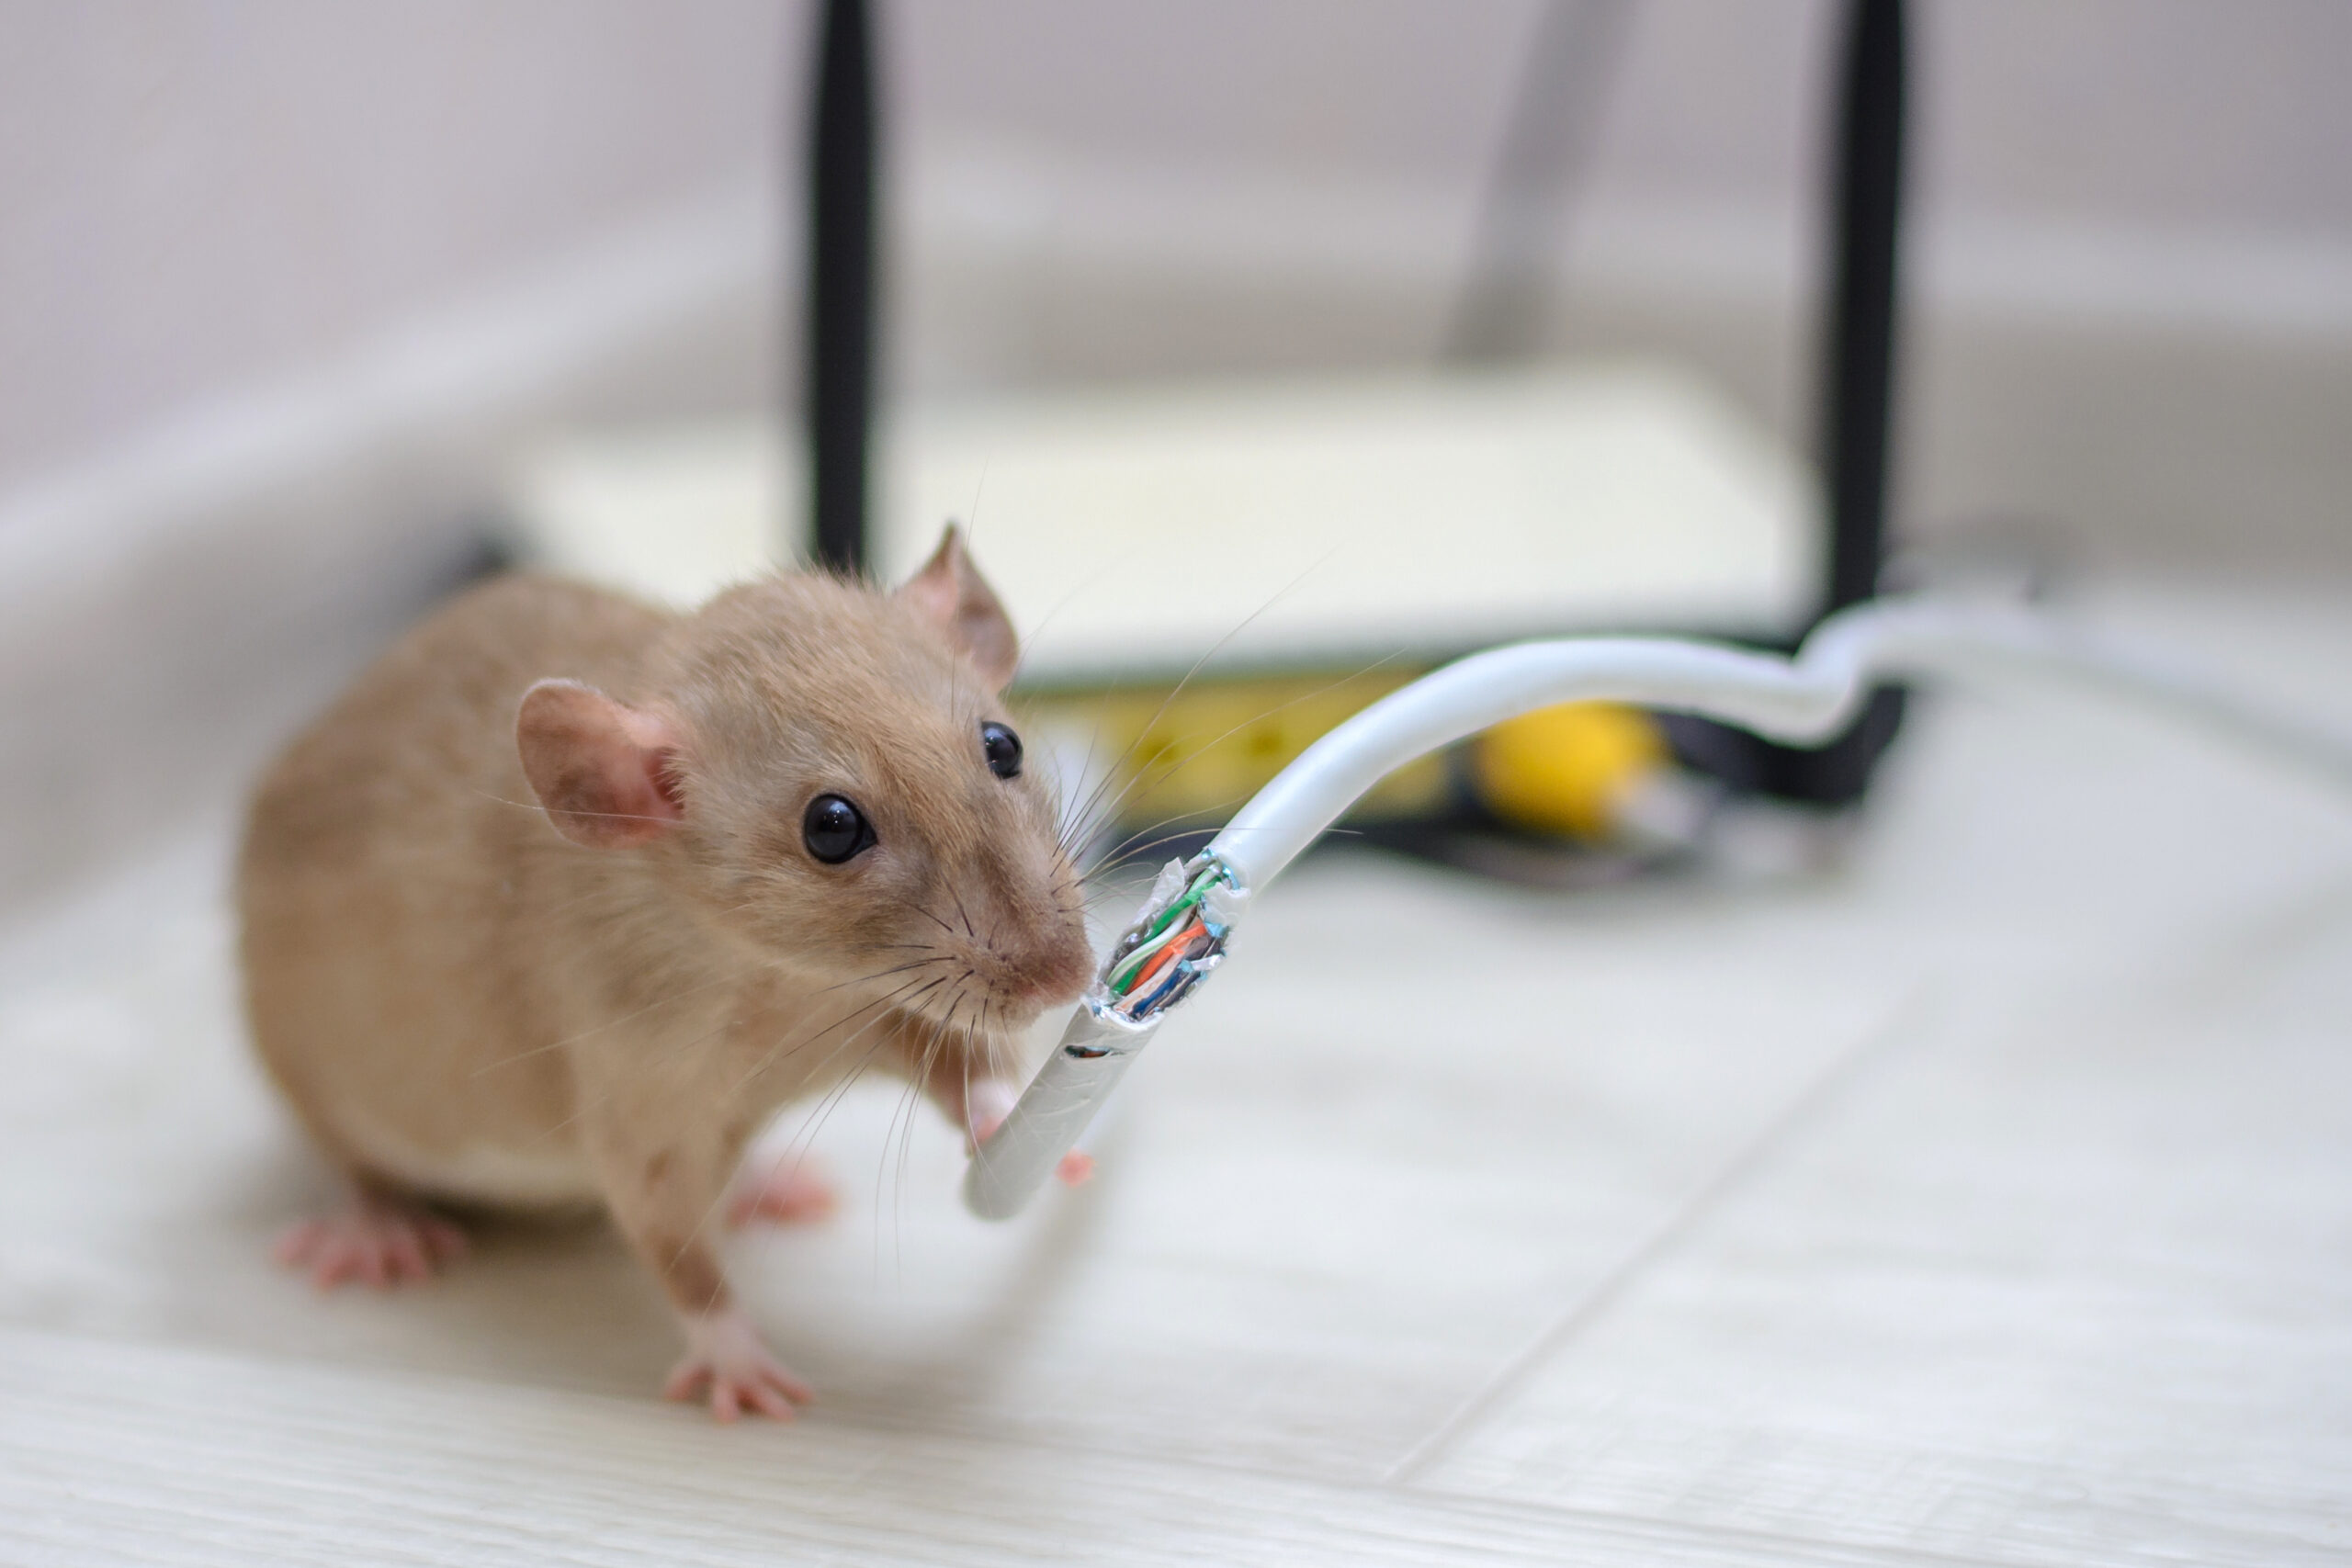 rodents from damaging your electrical system